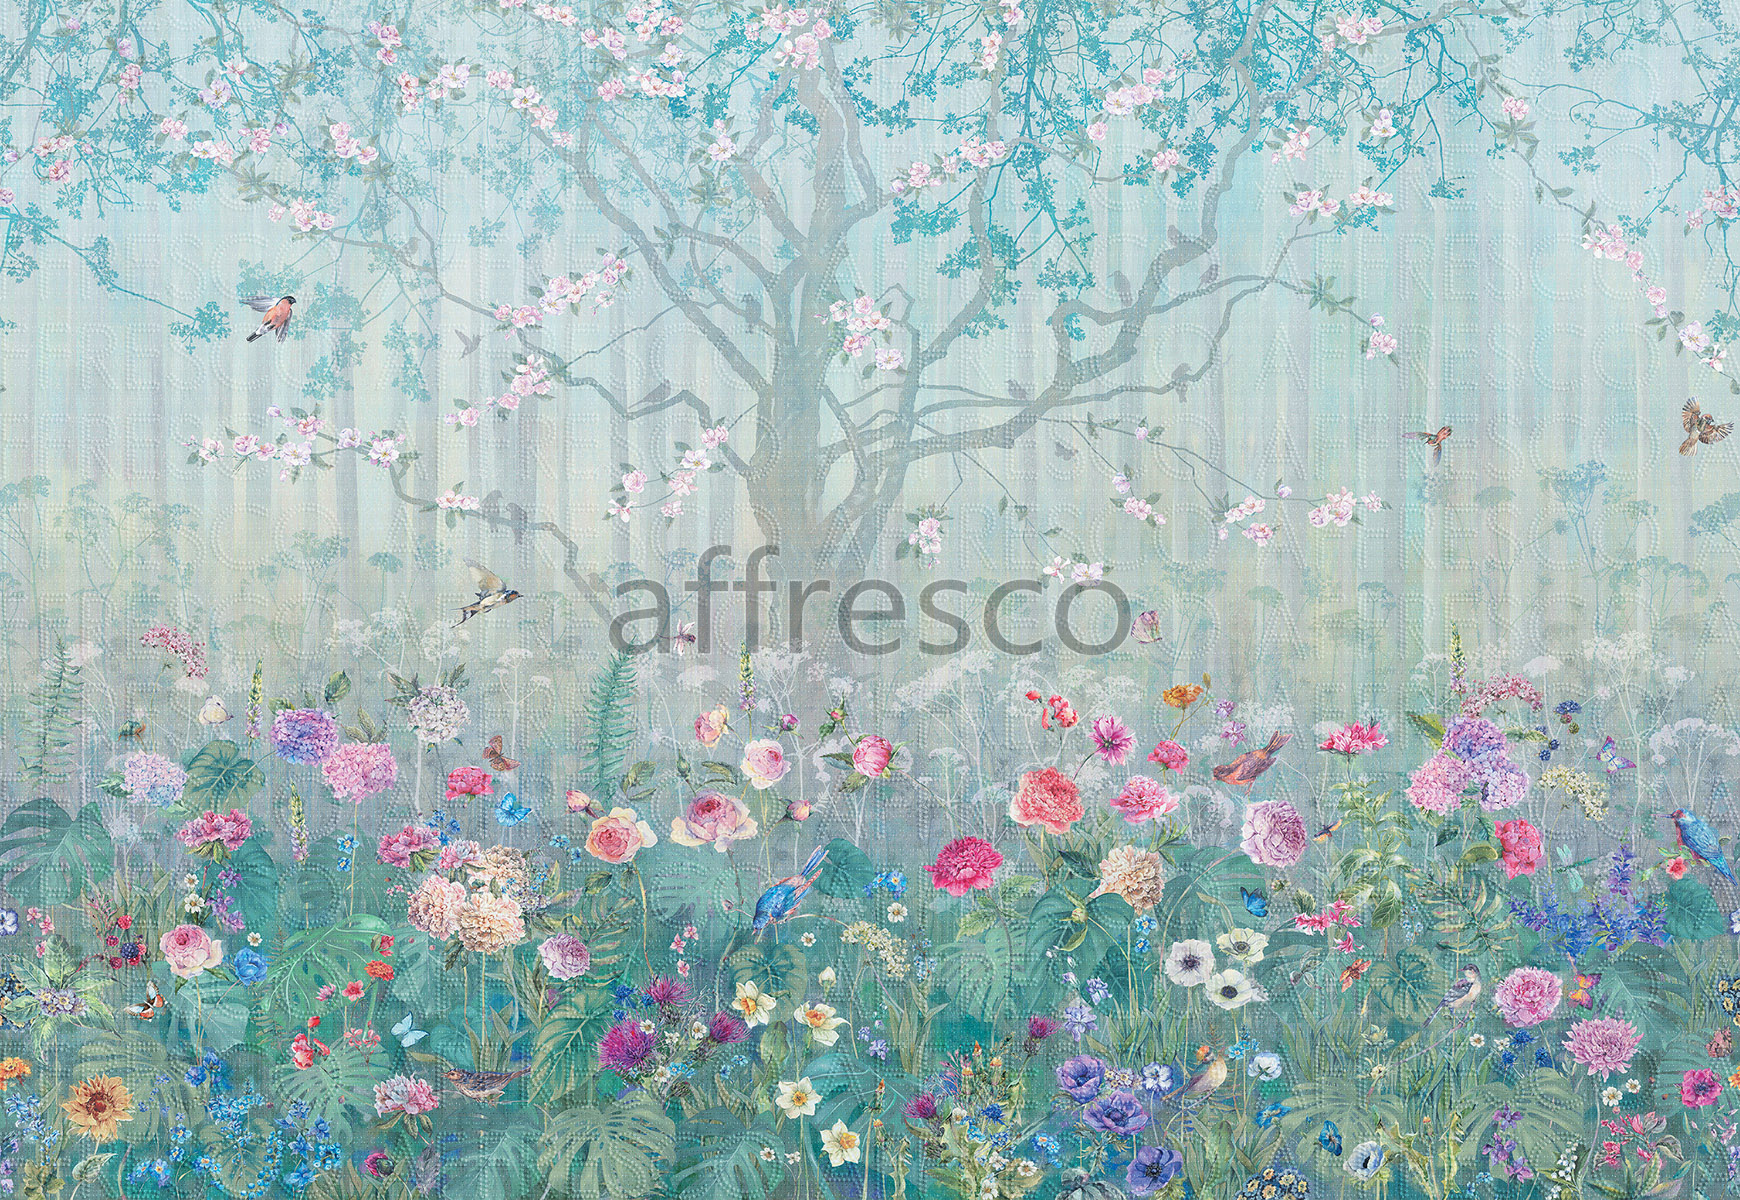 ID135836 | Forest | Blossoming forest | Affresco Factory